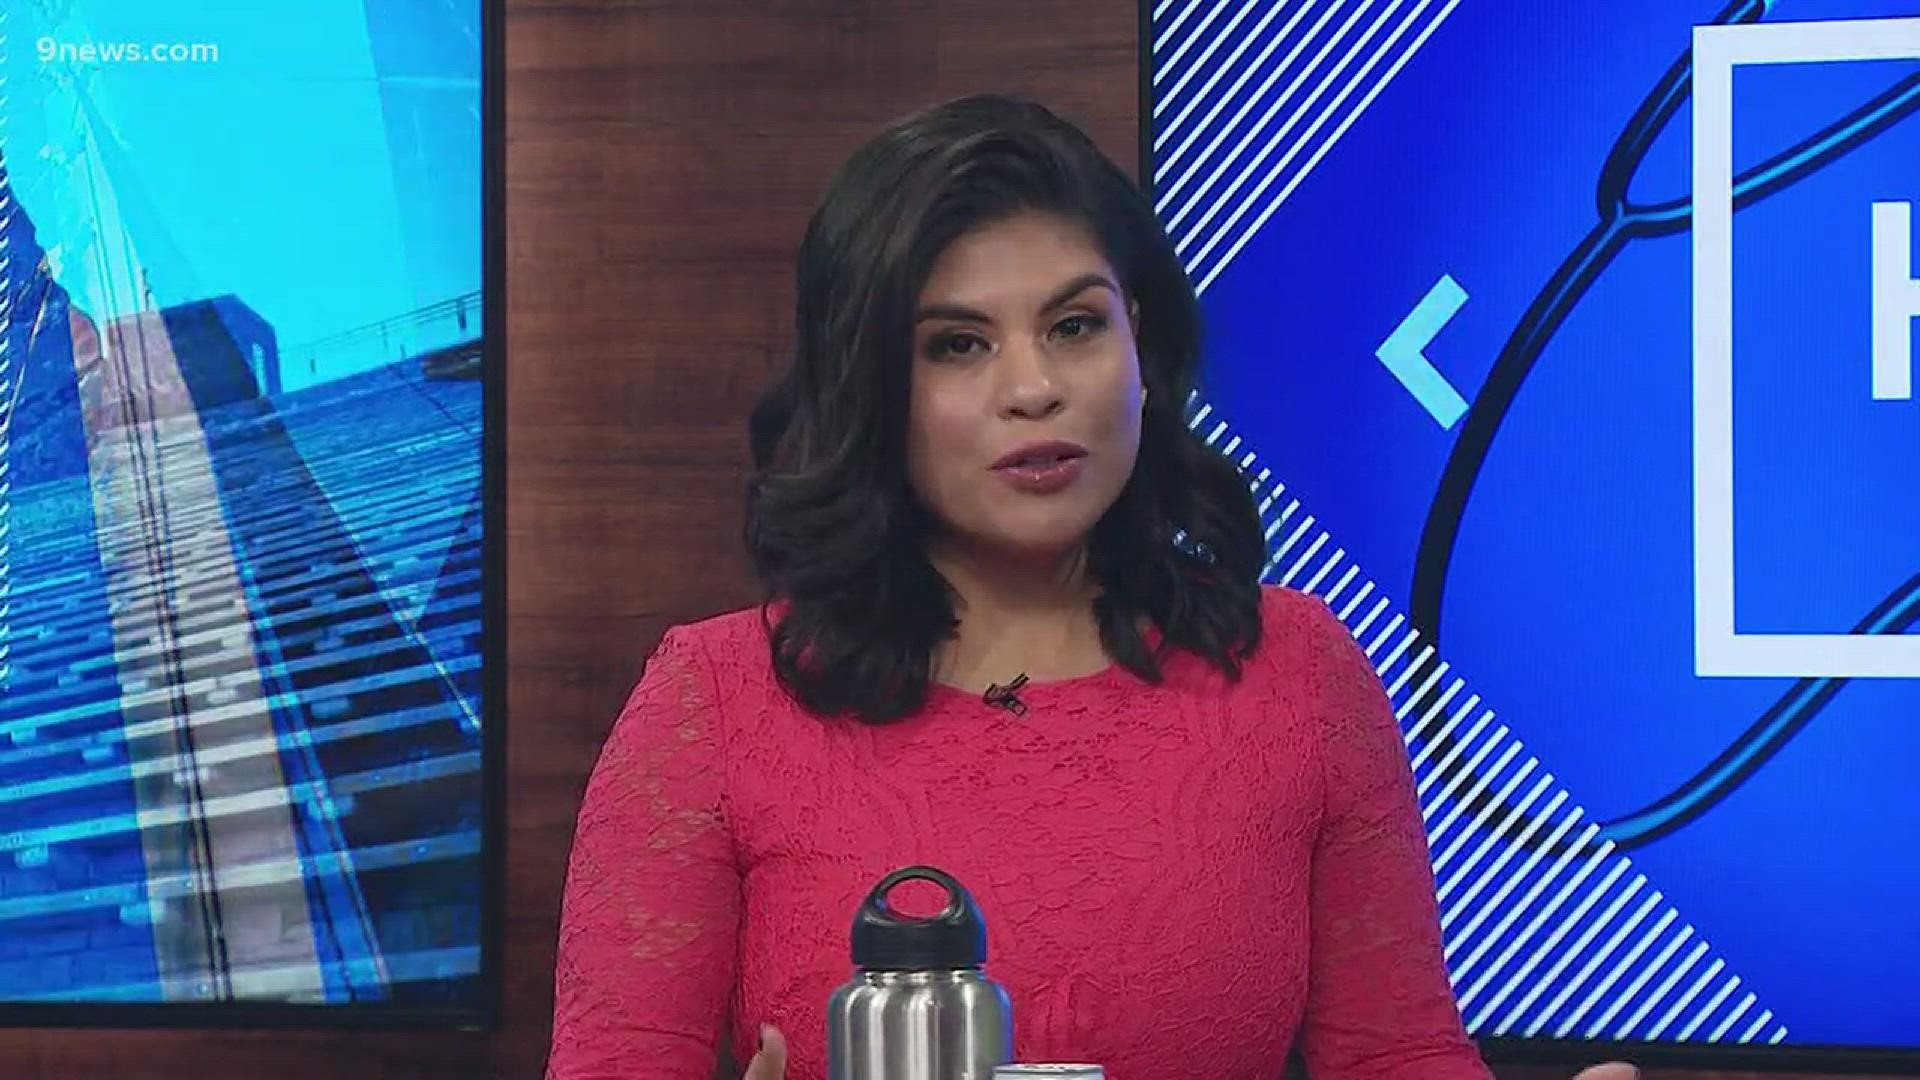 If you're trying to lose weight in the New Year, don't fall victim to these weight loss myths. Dr. Comilla explains why.